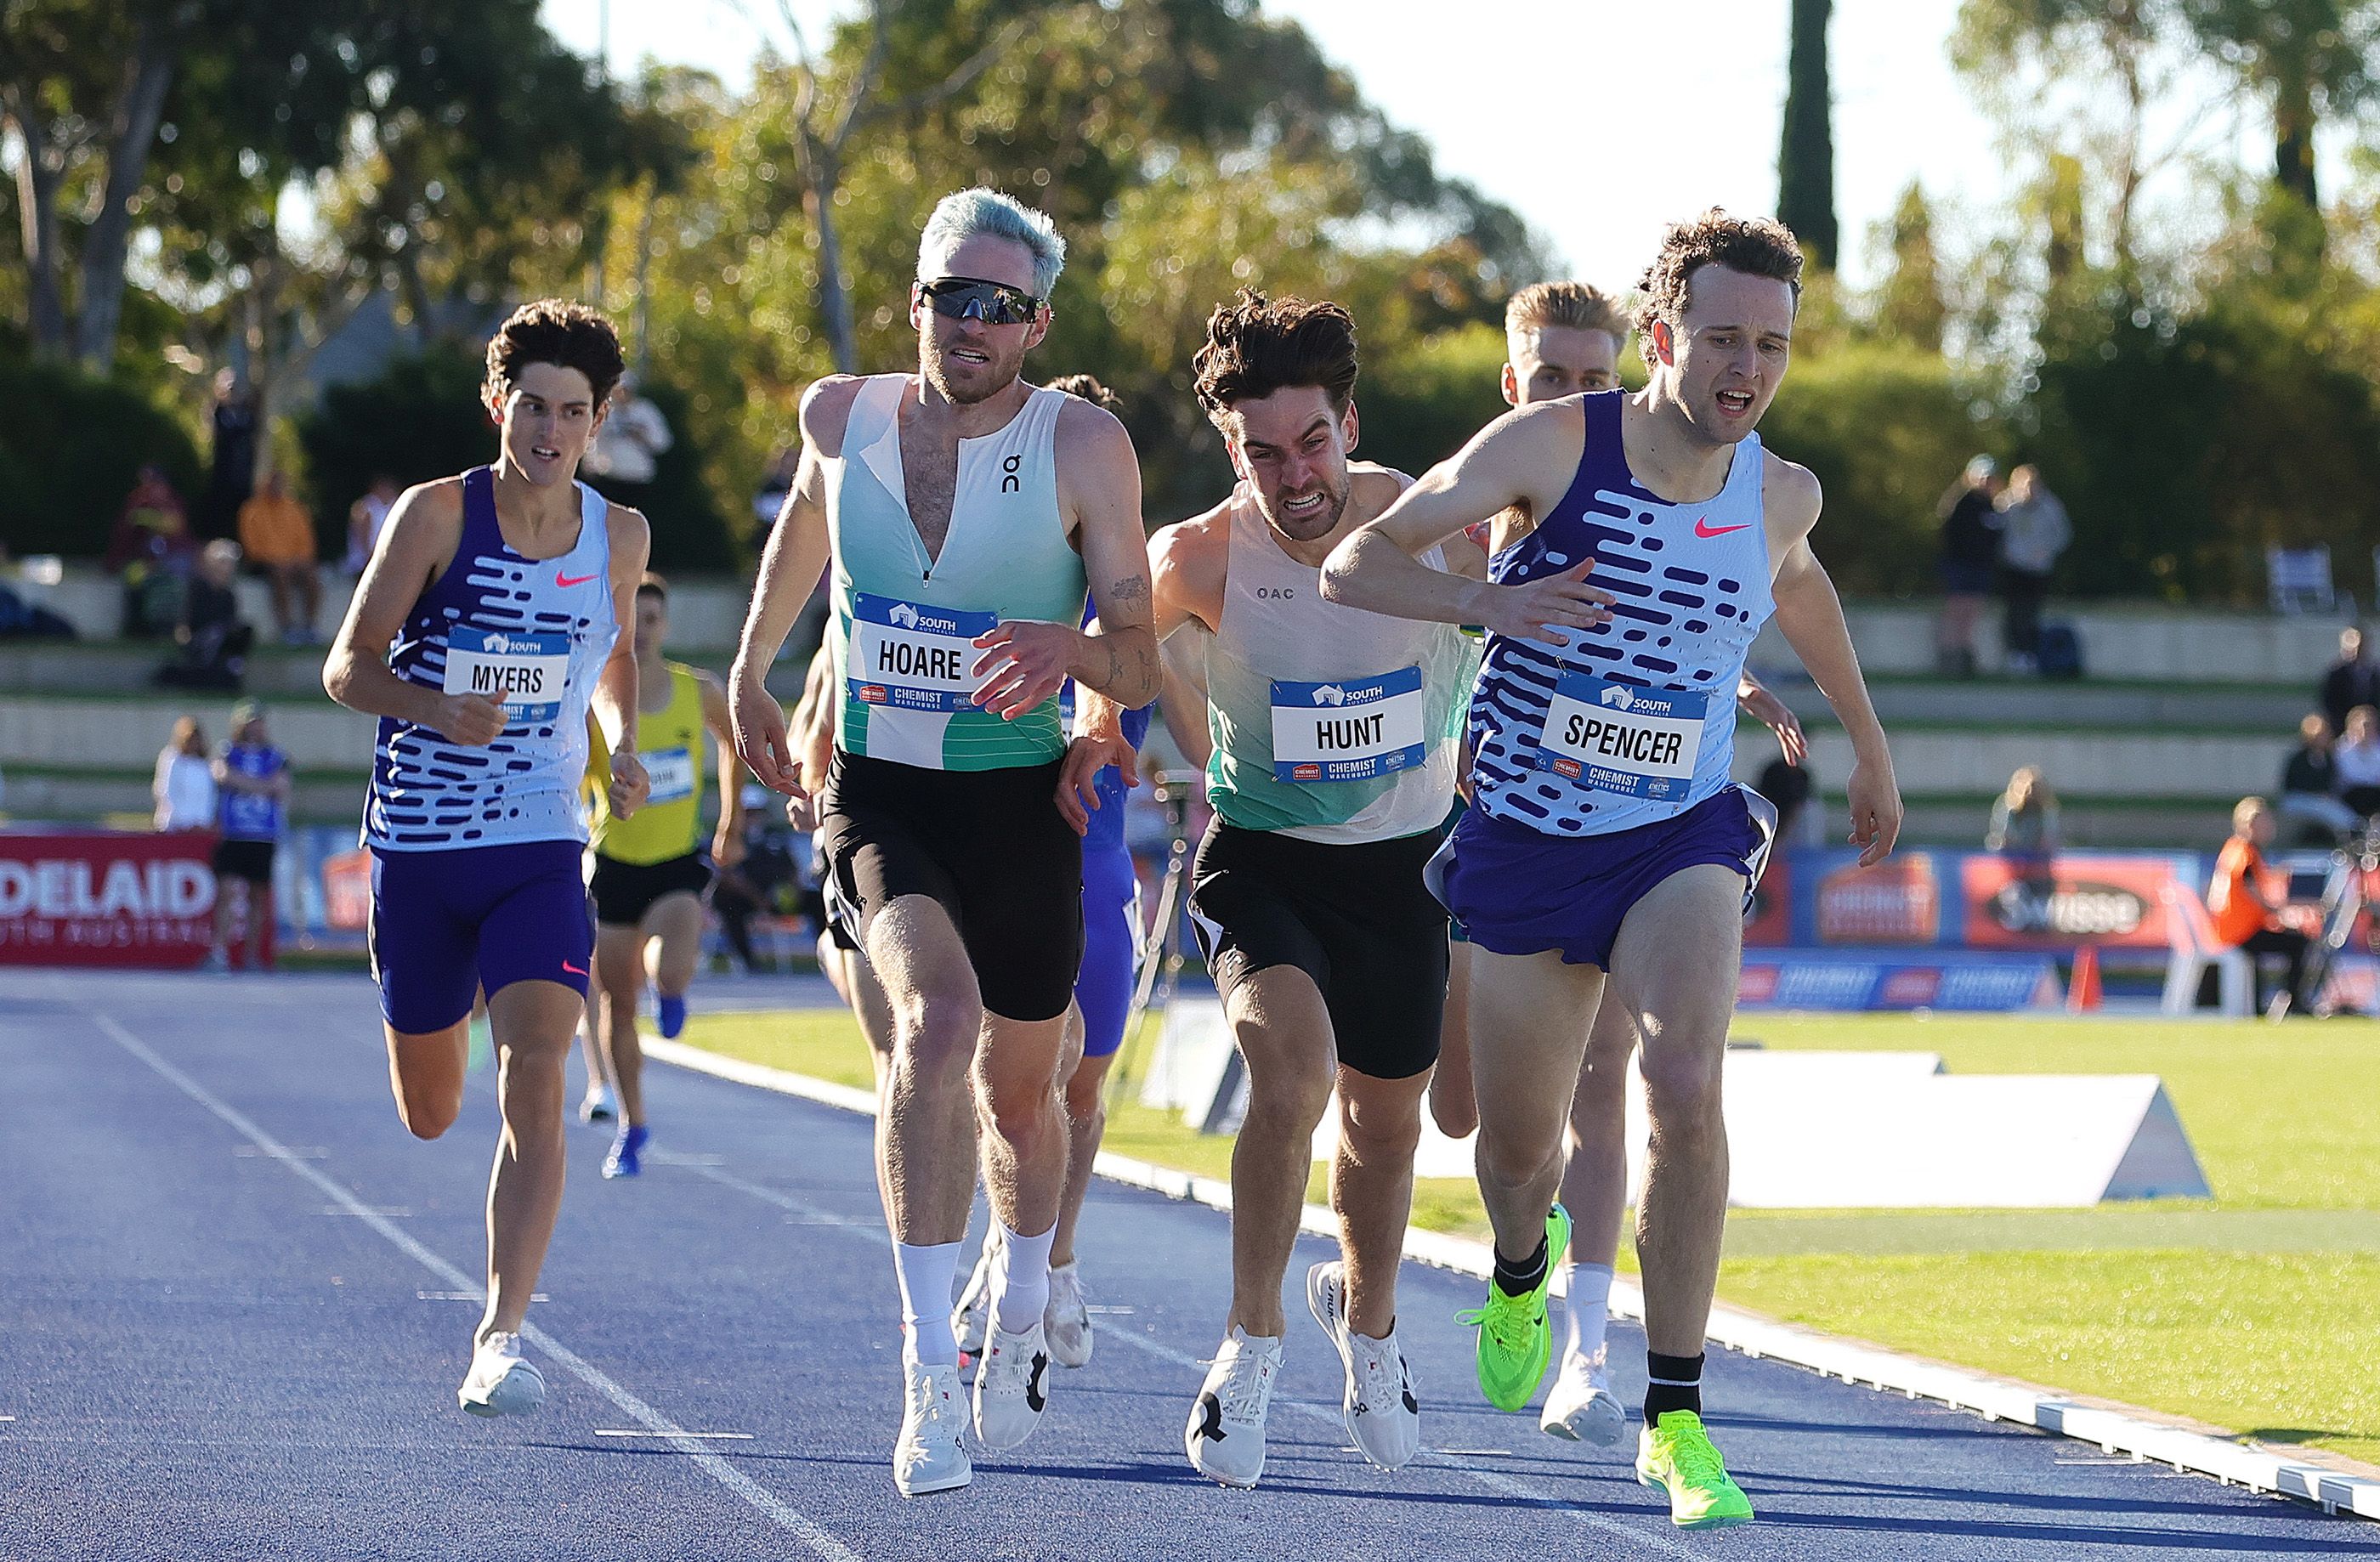 Adam Spencer wins the 1500m at the Australian Championships